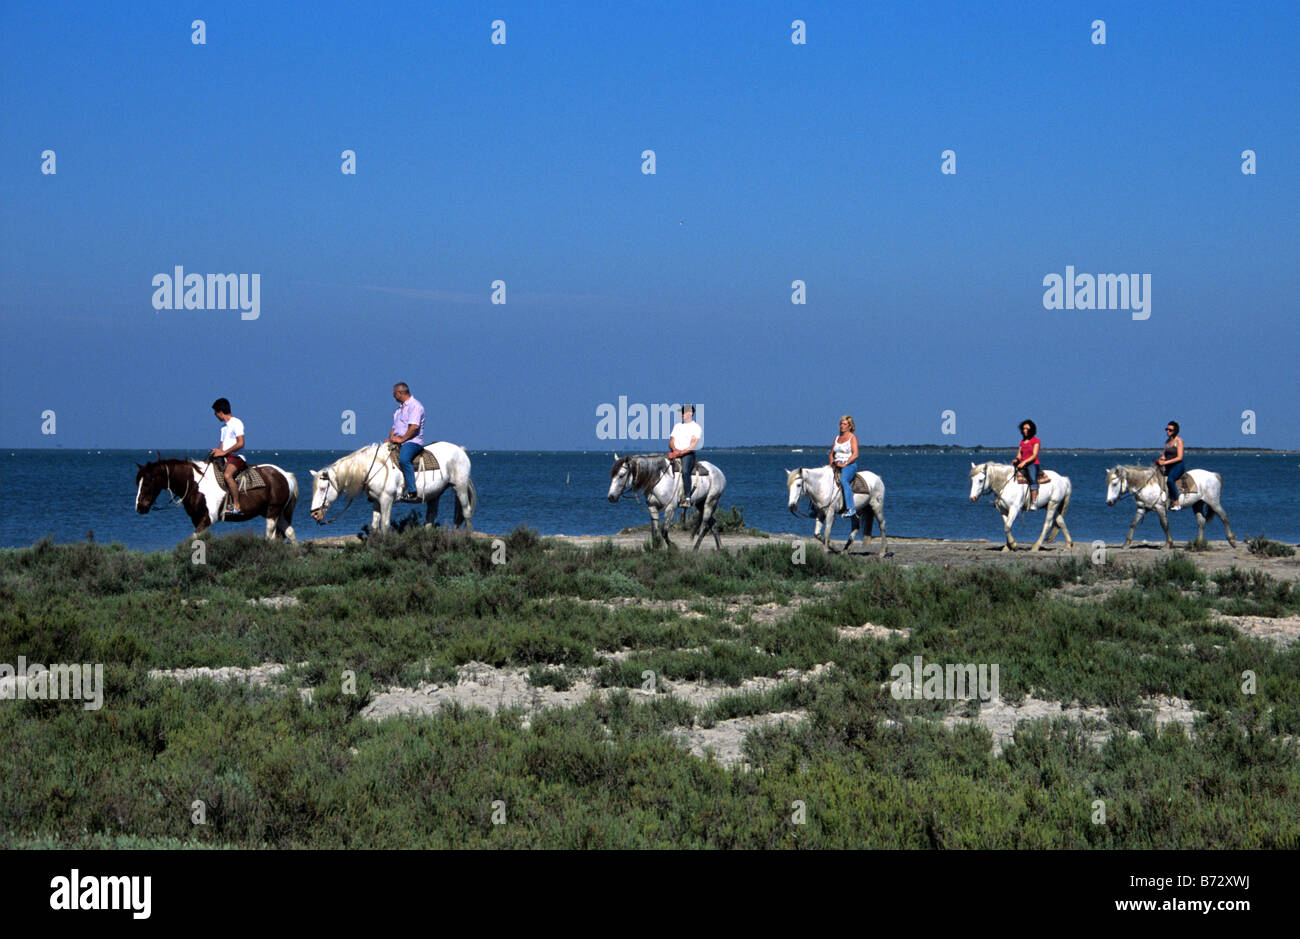 Horseriding on White Camargue Horses Along the Shores or Banks of the Etang (or Lake) Vaccarès, Camargue, Provence, France Stock Photo